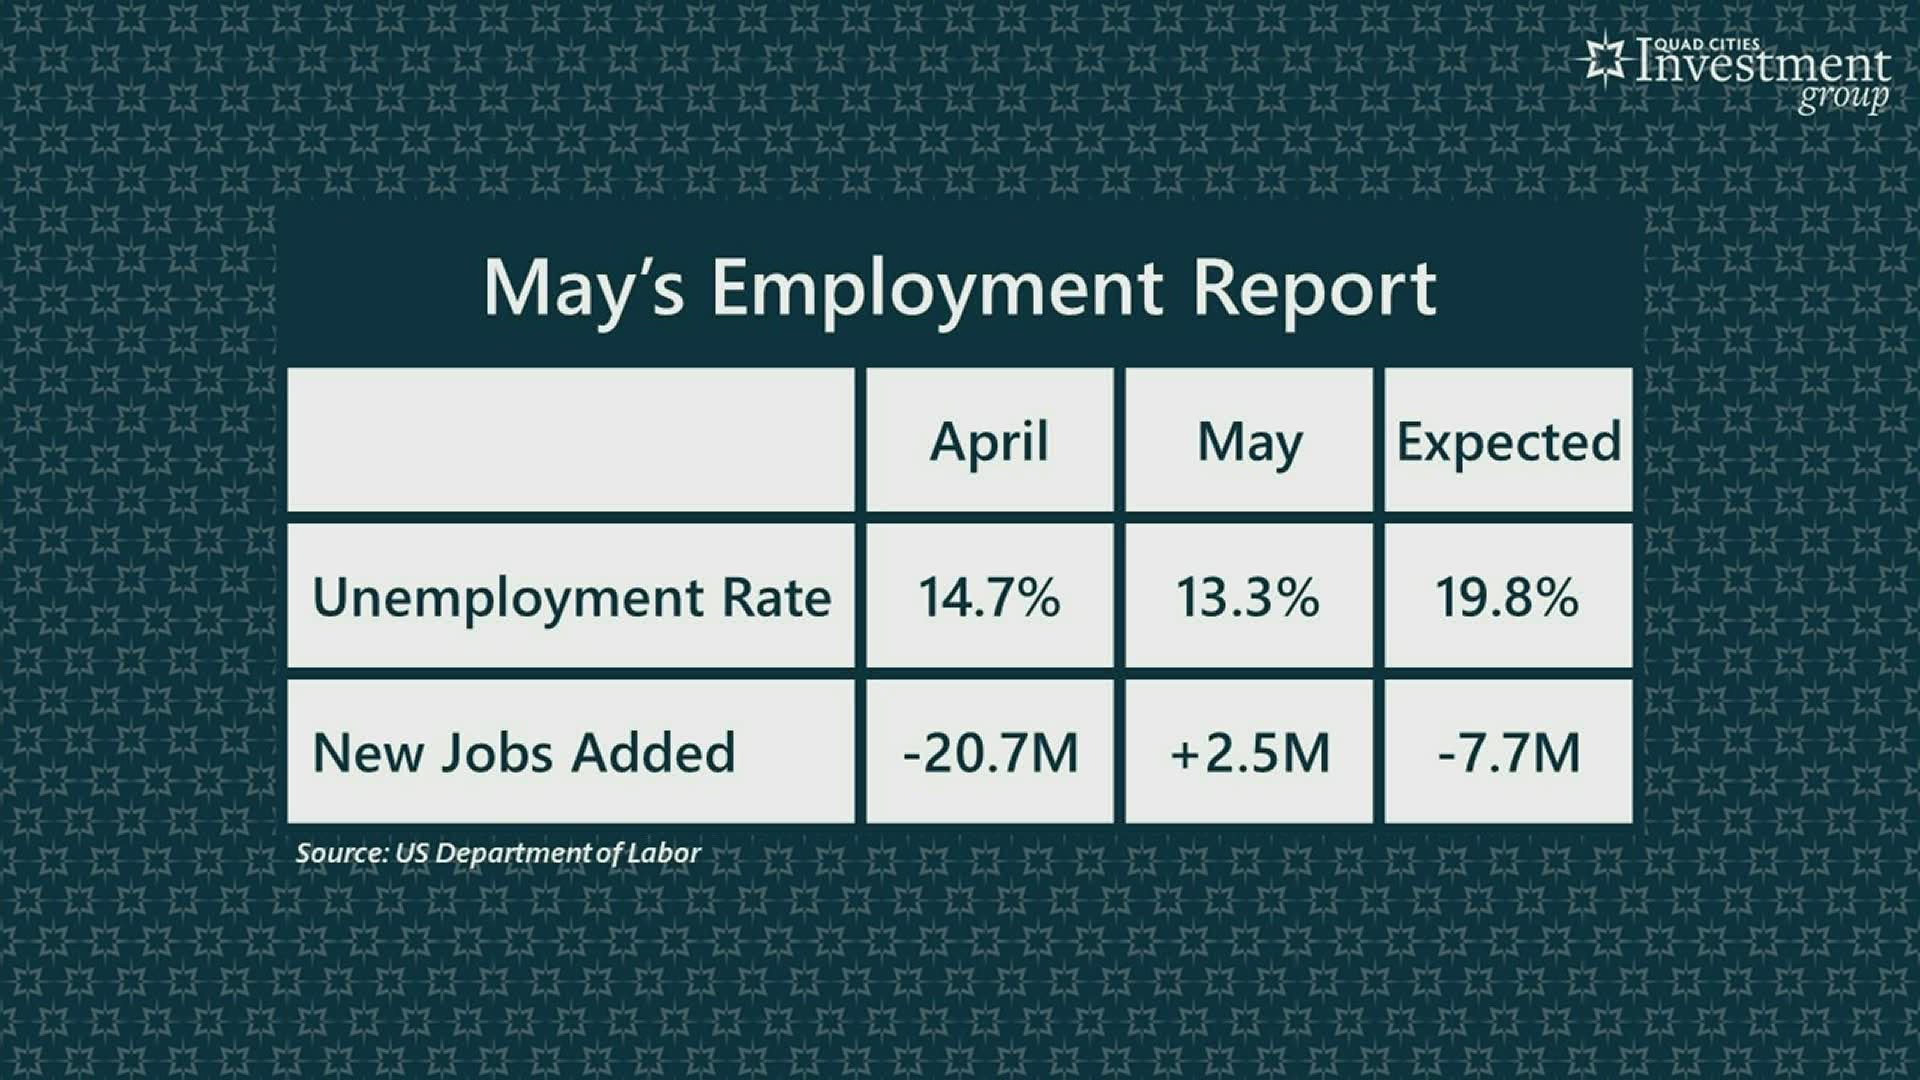 The unemployment rate falls to 13.3% as the US adds 2.5 million jobs in May.